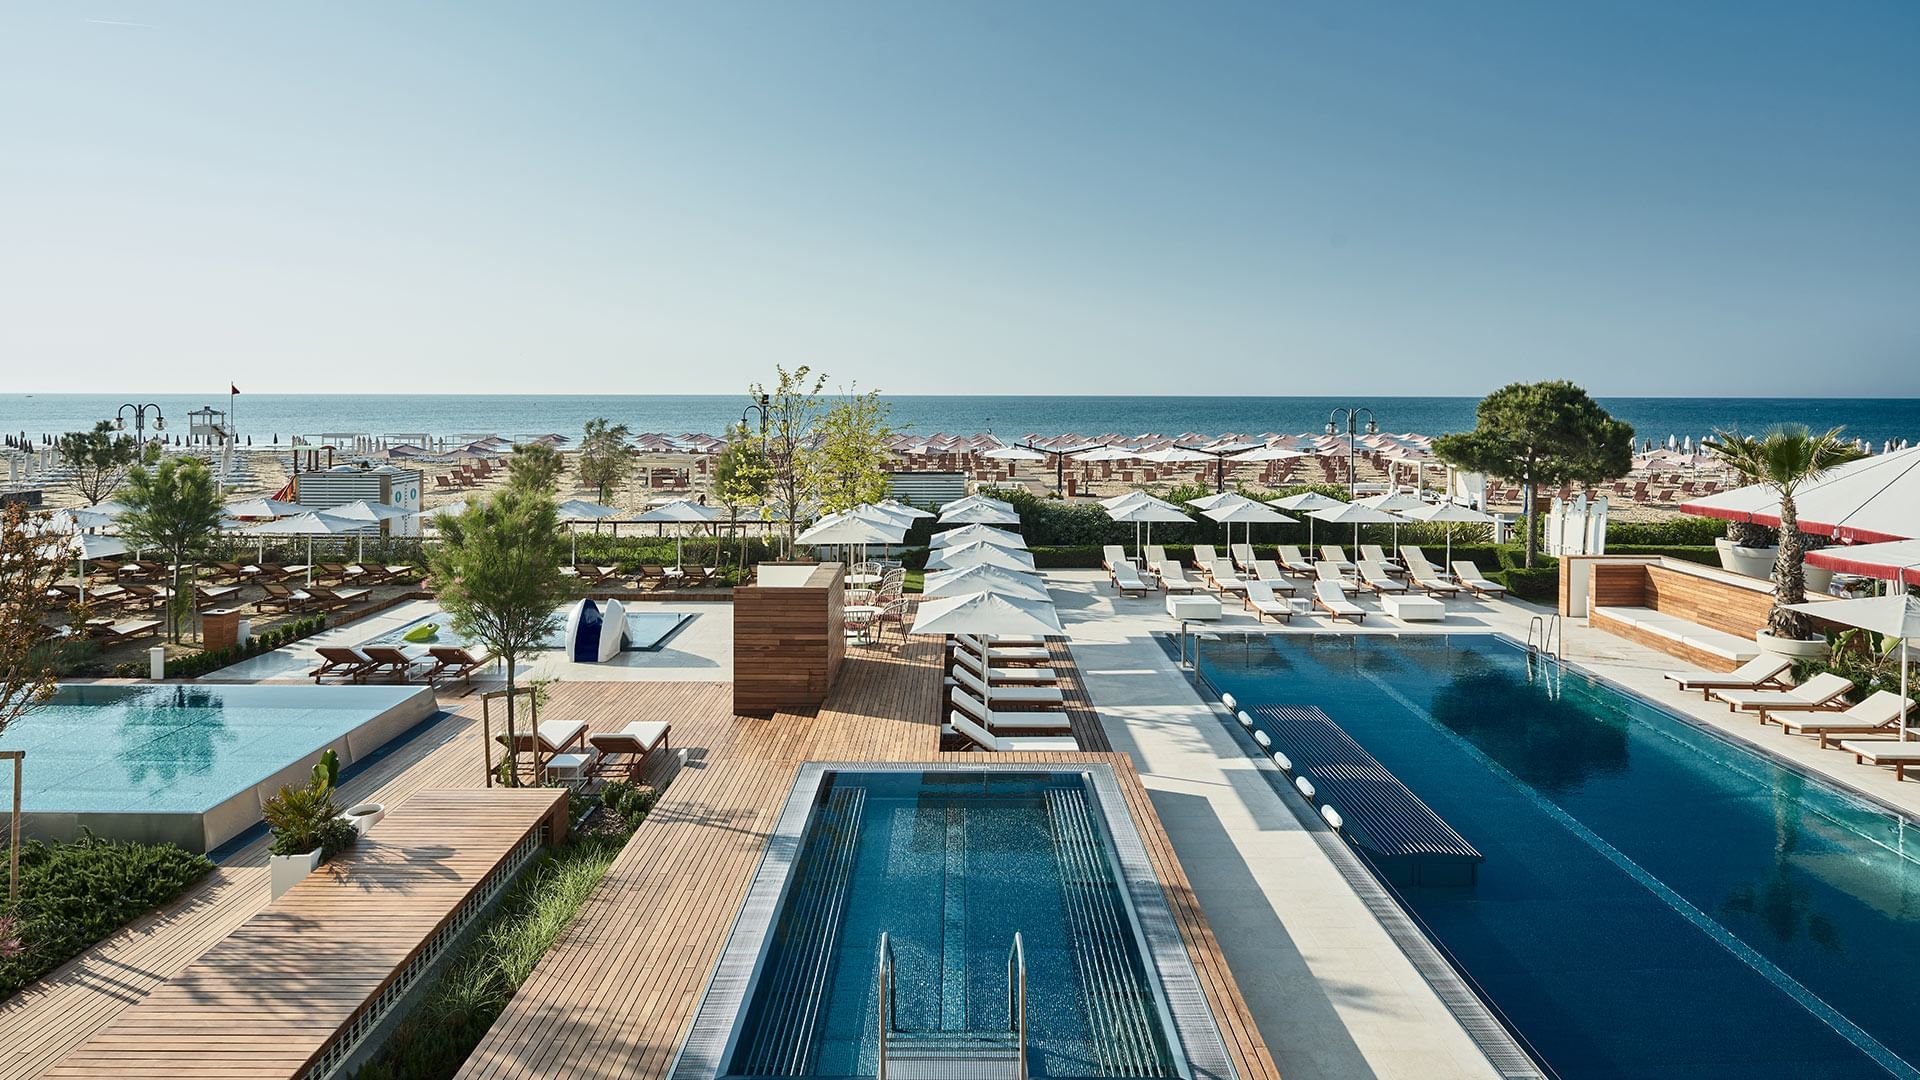 Aerial view of pool area by sea at Falkensteiner Jesolo